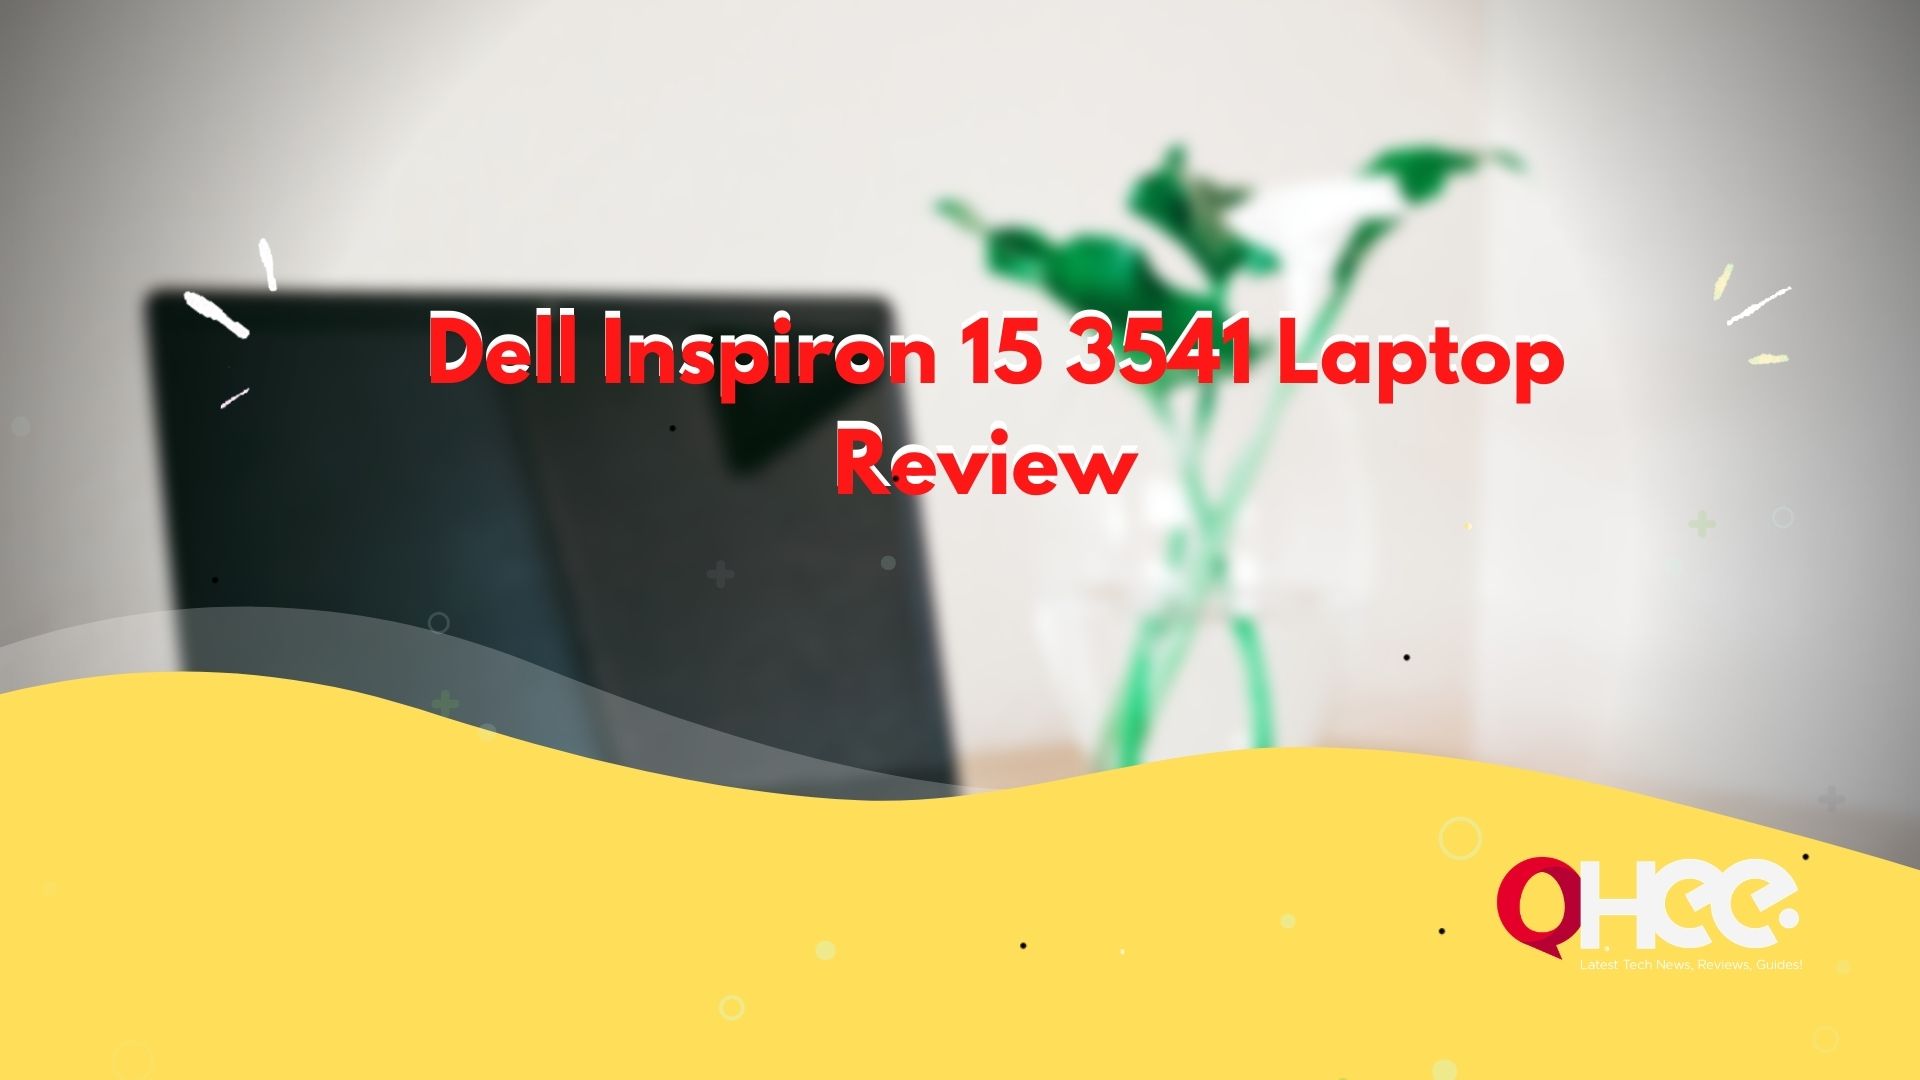 Dell Inspiron 15 3541 Laptop Review – A Full Review